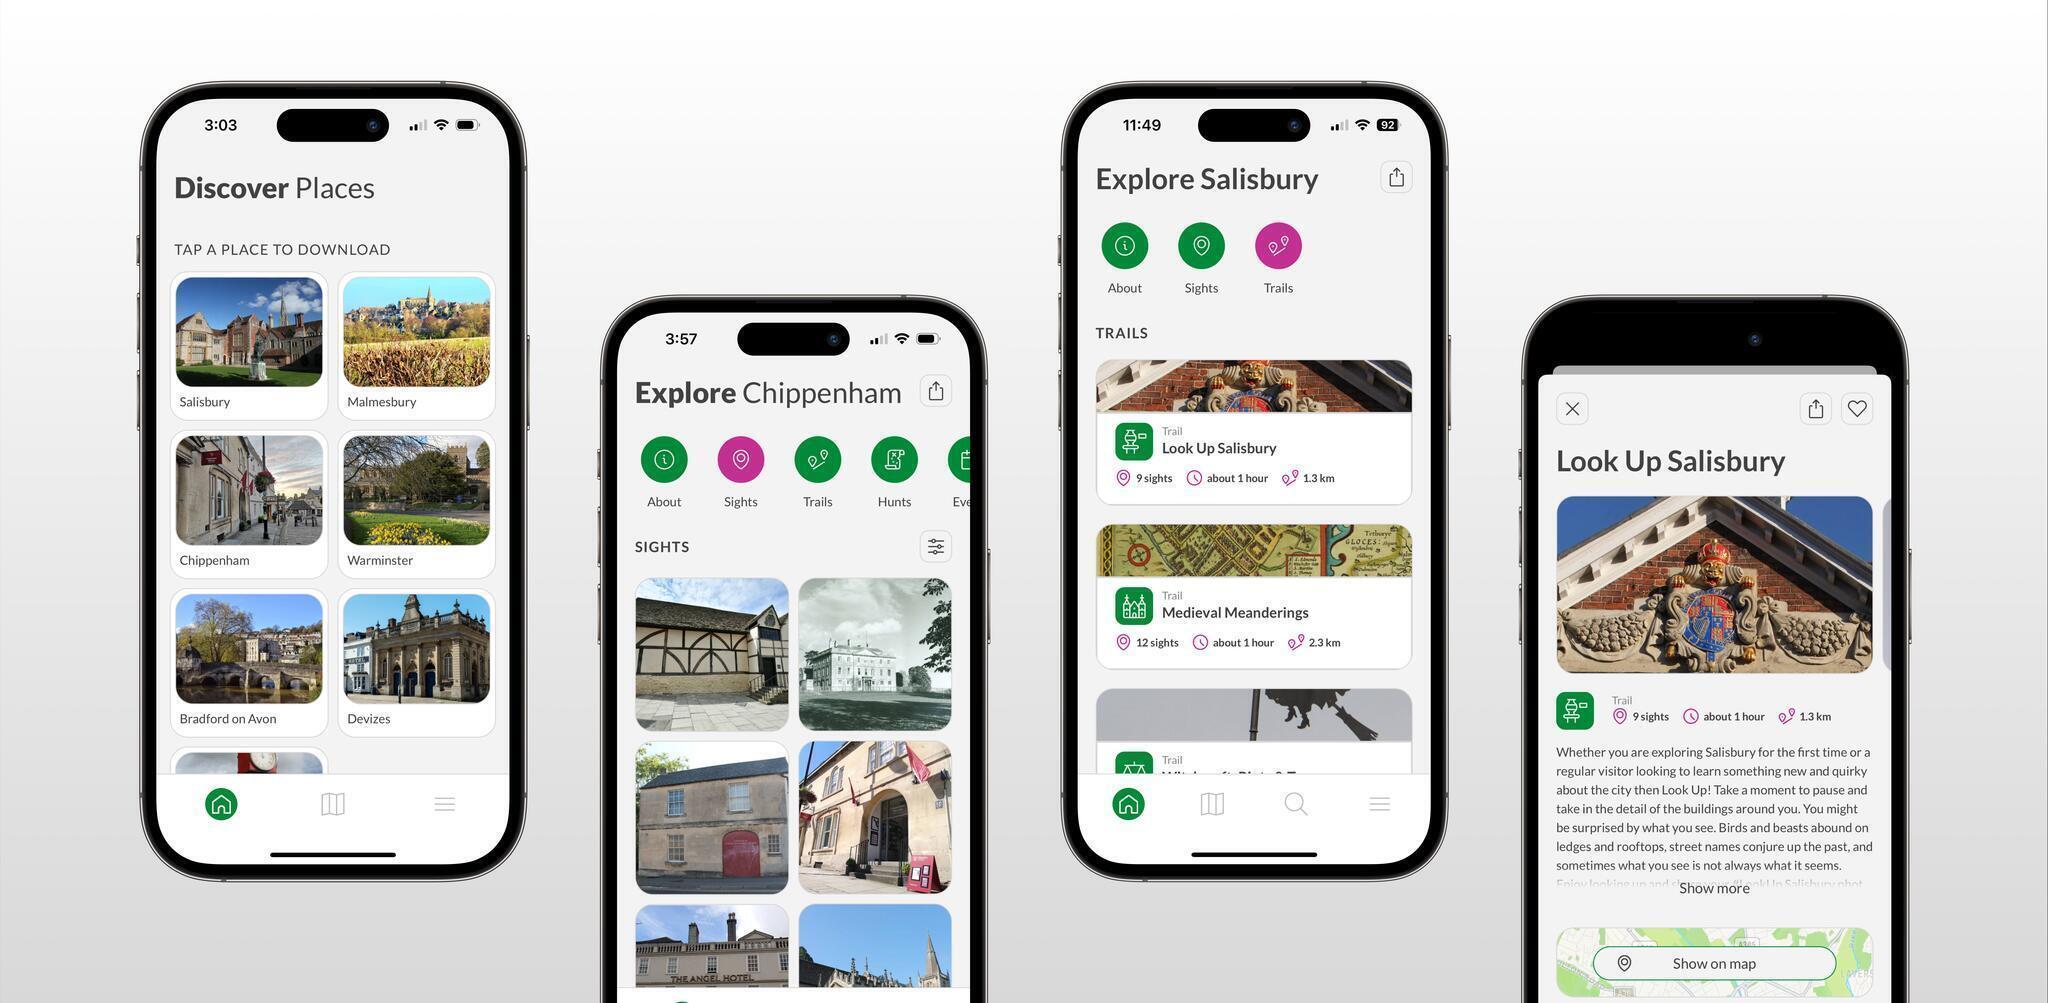 Several screenshots of Explore Wiltshire Mobile App showing the main features of the app